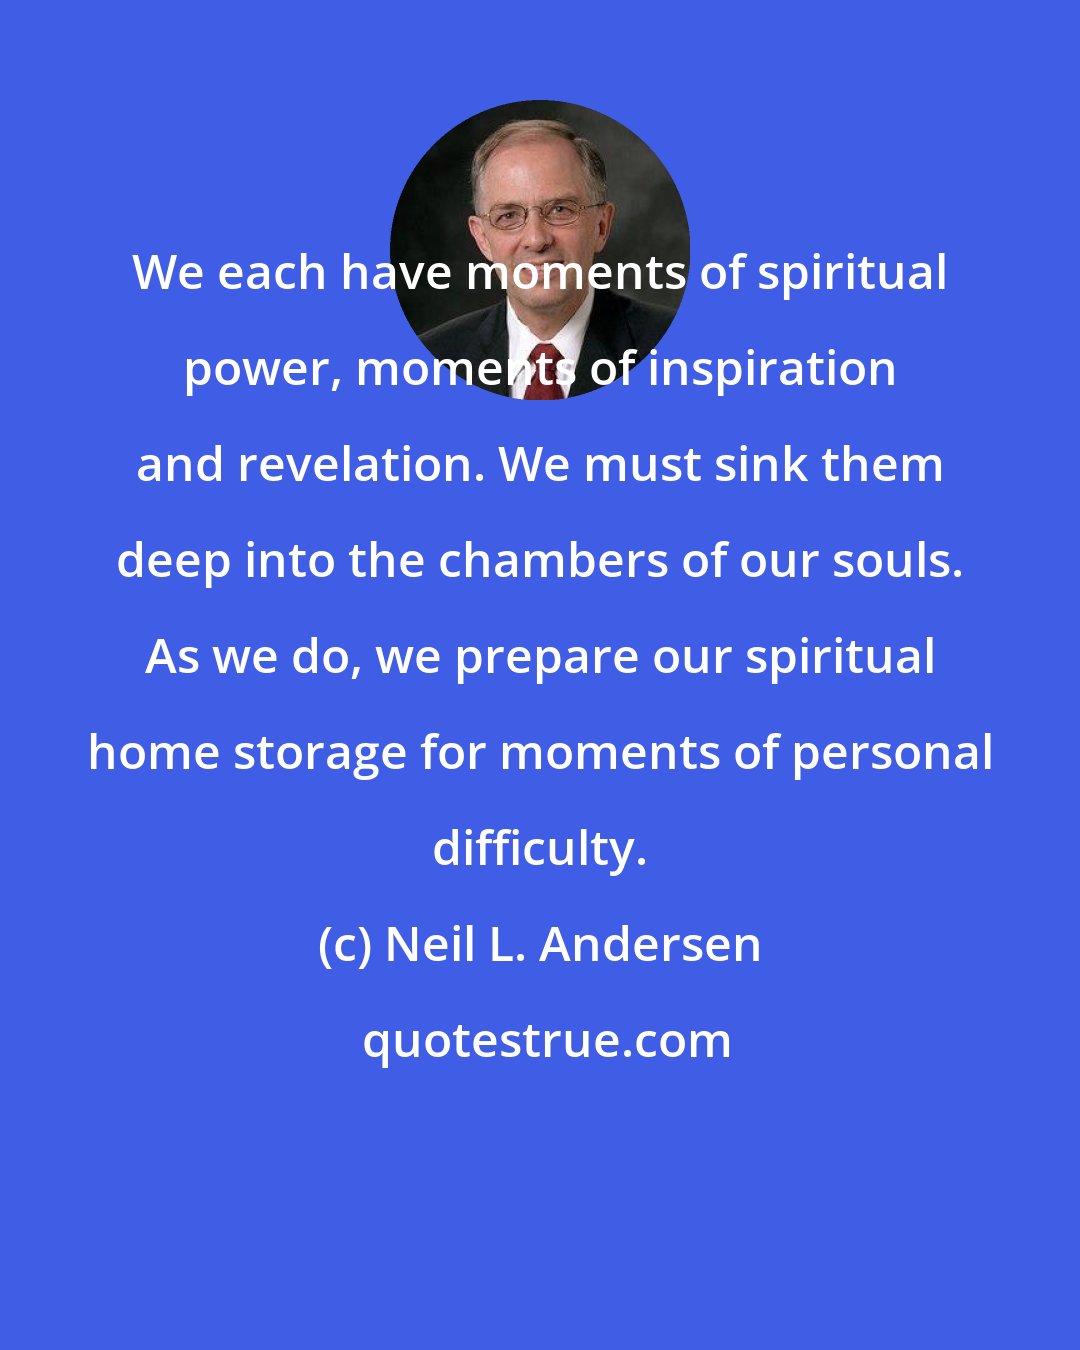 Neil L. Andersen: We each have moments of spiritual power, moments of inspiration and revelation. We must sink them deep into the chambers of our souls. As we do, we prepare our spiritual home storage for moments of personal difficulty.